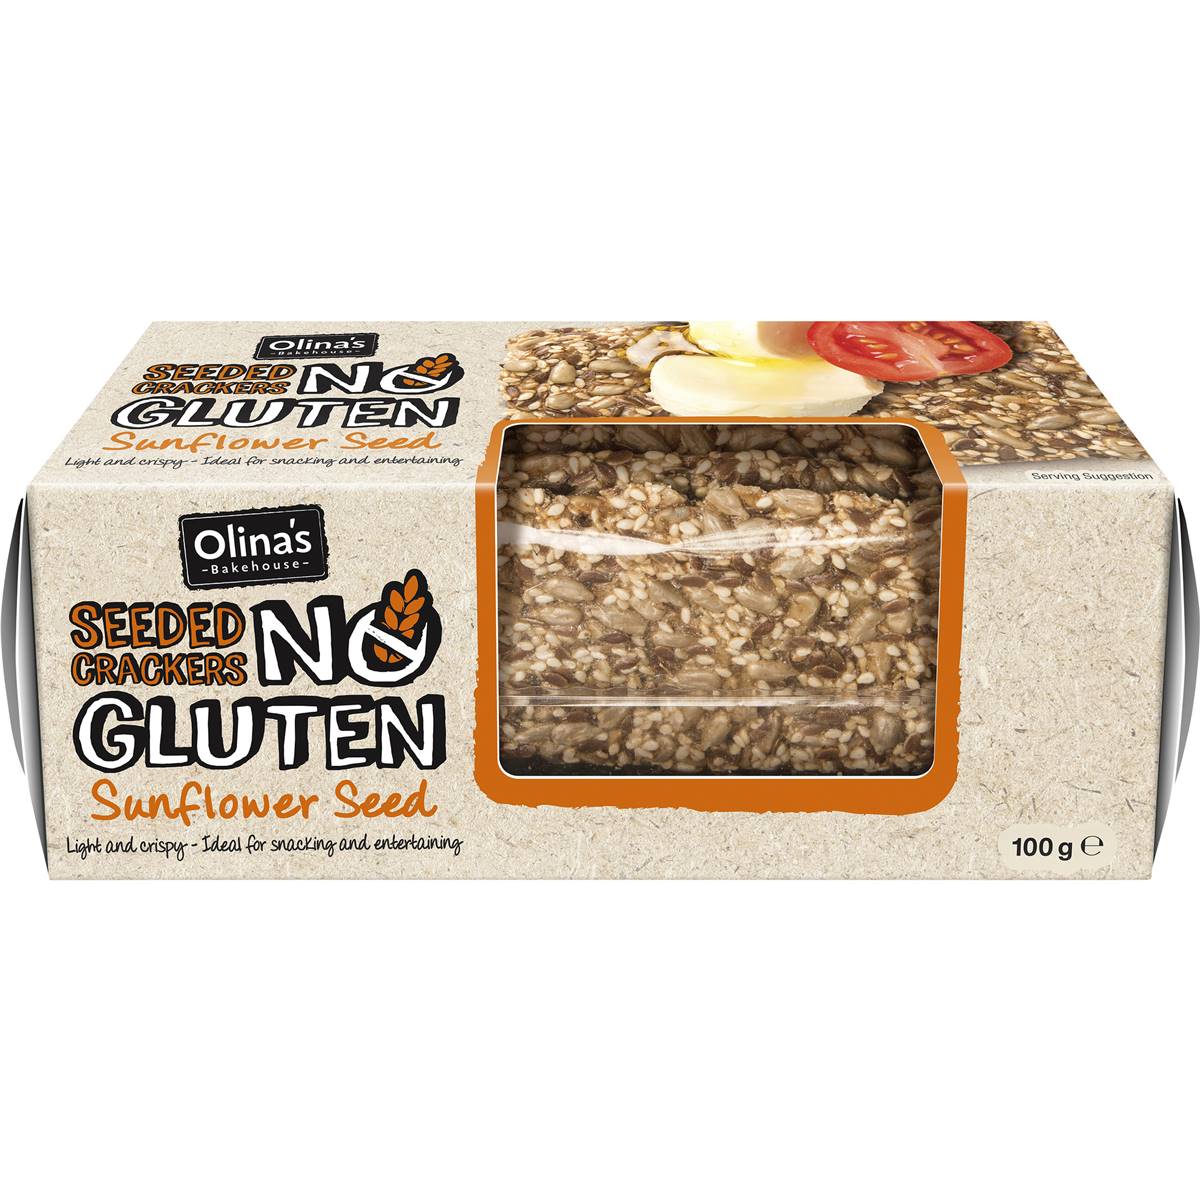 Calories in Olina's Gluten Free Crackers Sunflower Seed